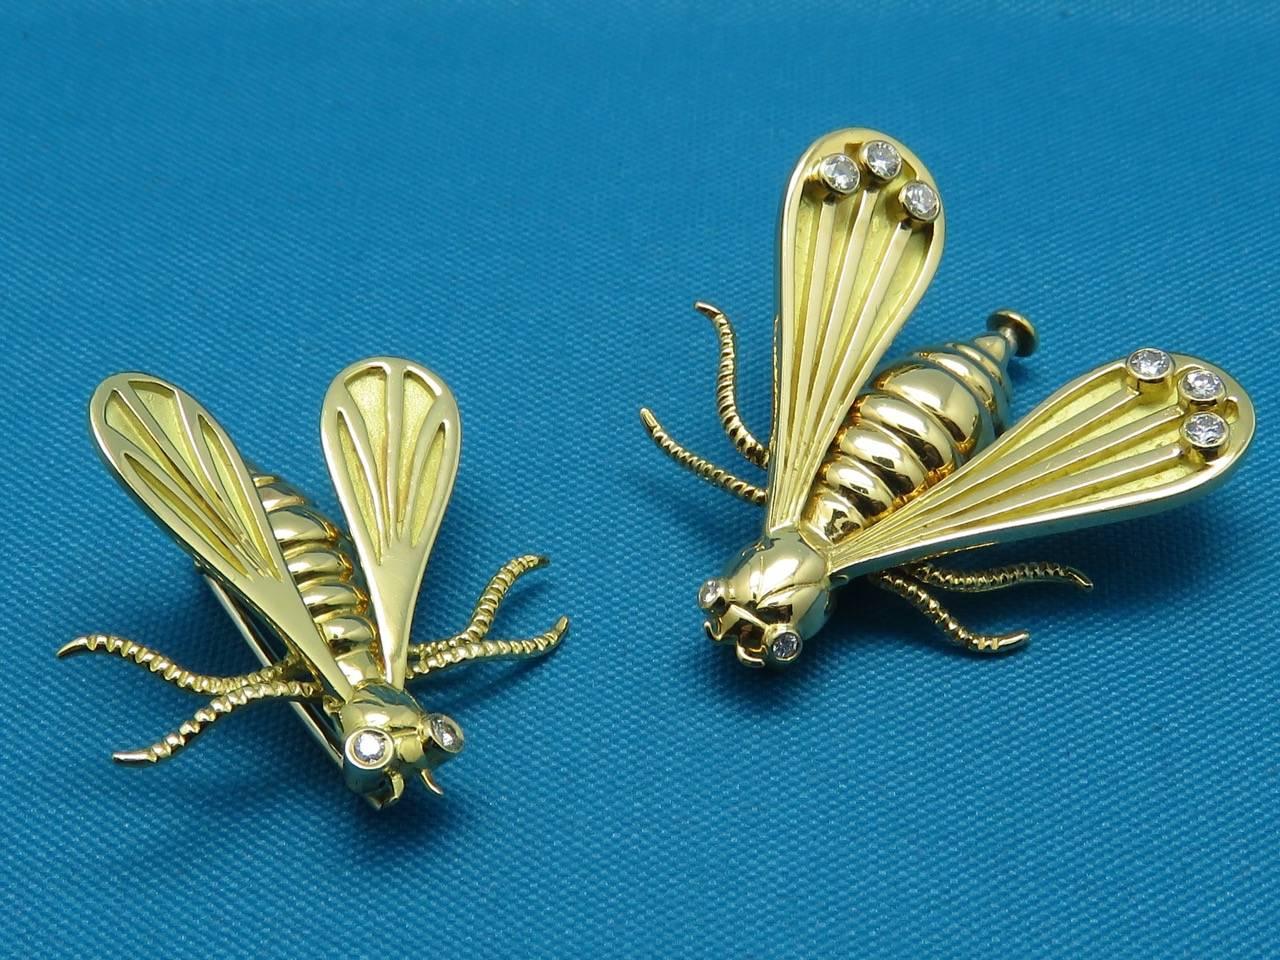 Chaumet Paris "Bees" , two small clips in yellow gold,diamond representing Bee.
Measurements:
First Pin: 1.06 in W x 1.06 L
Second Pin: 0.94 in W x 1.18 in L
Weight: 12.20 Grams